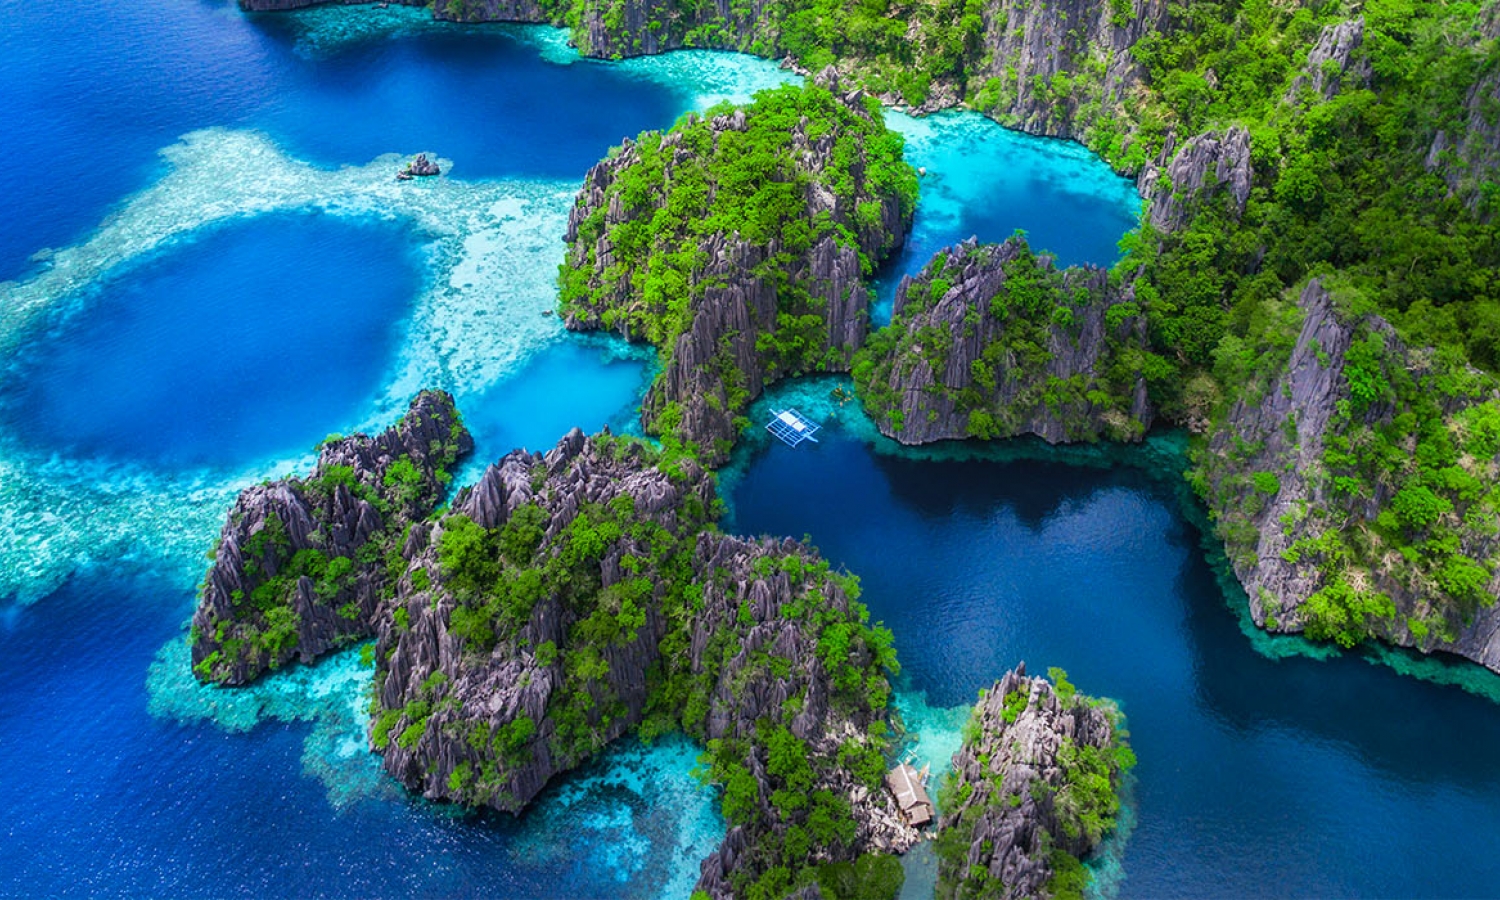 https://www.vacationhive.com/images/hives/5/5-coron-island-aerial-view-banner2.jpg